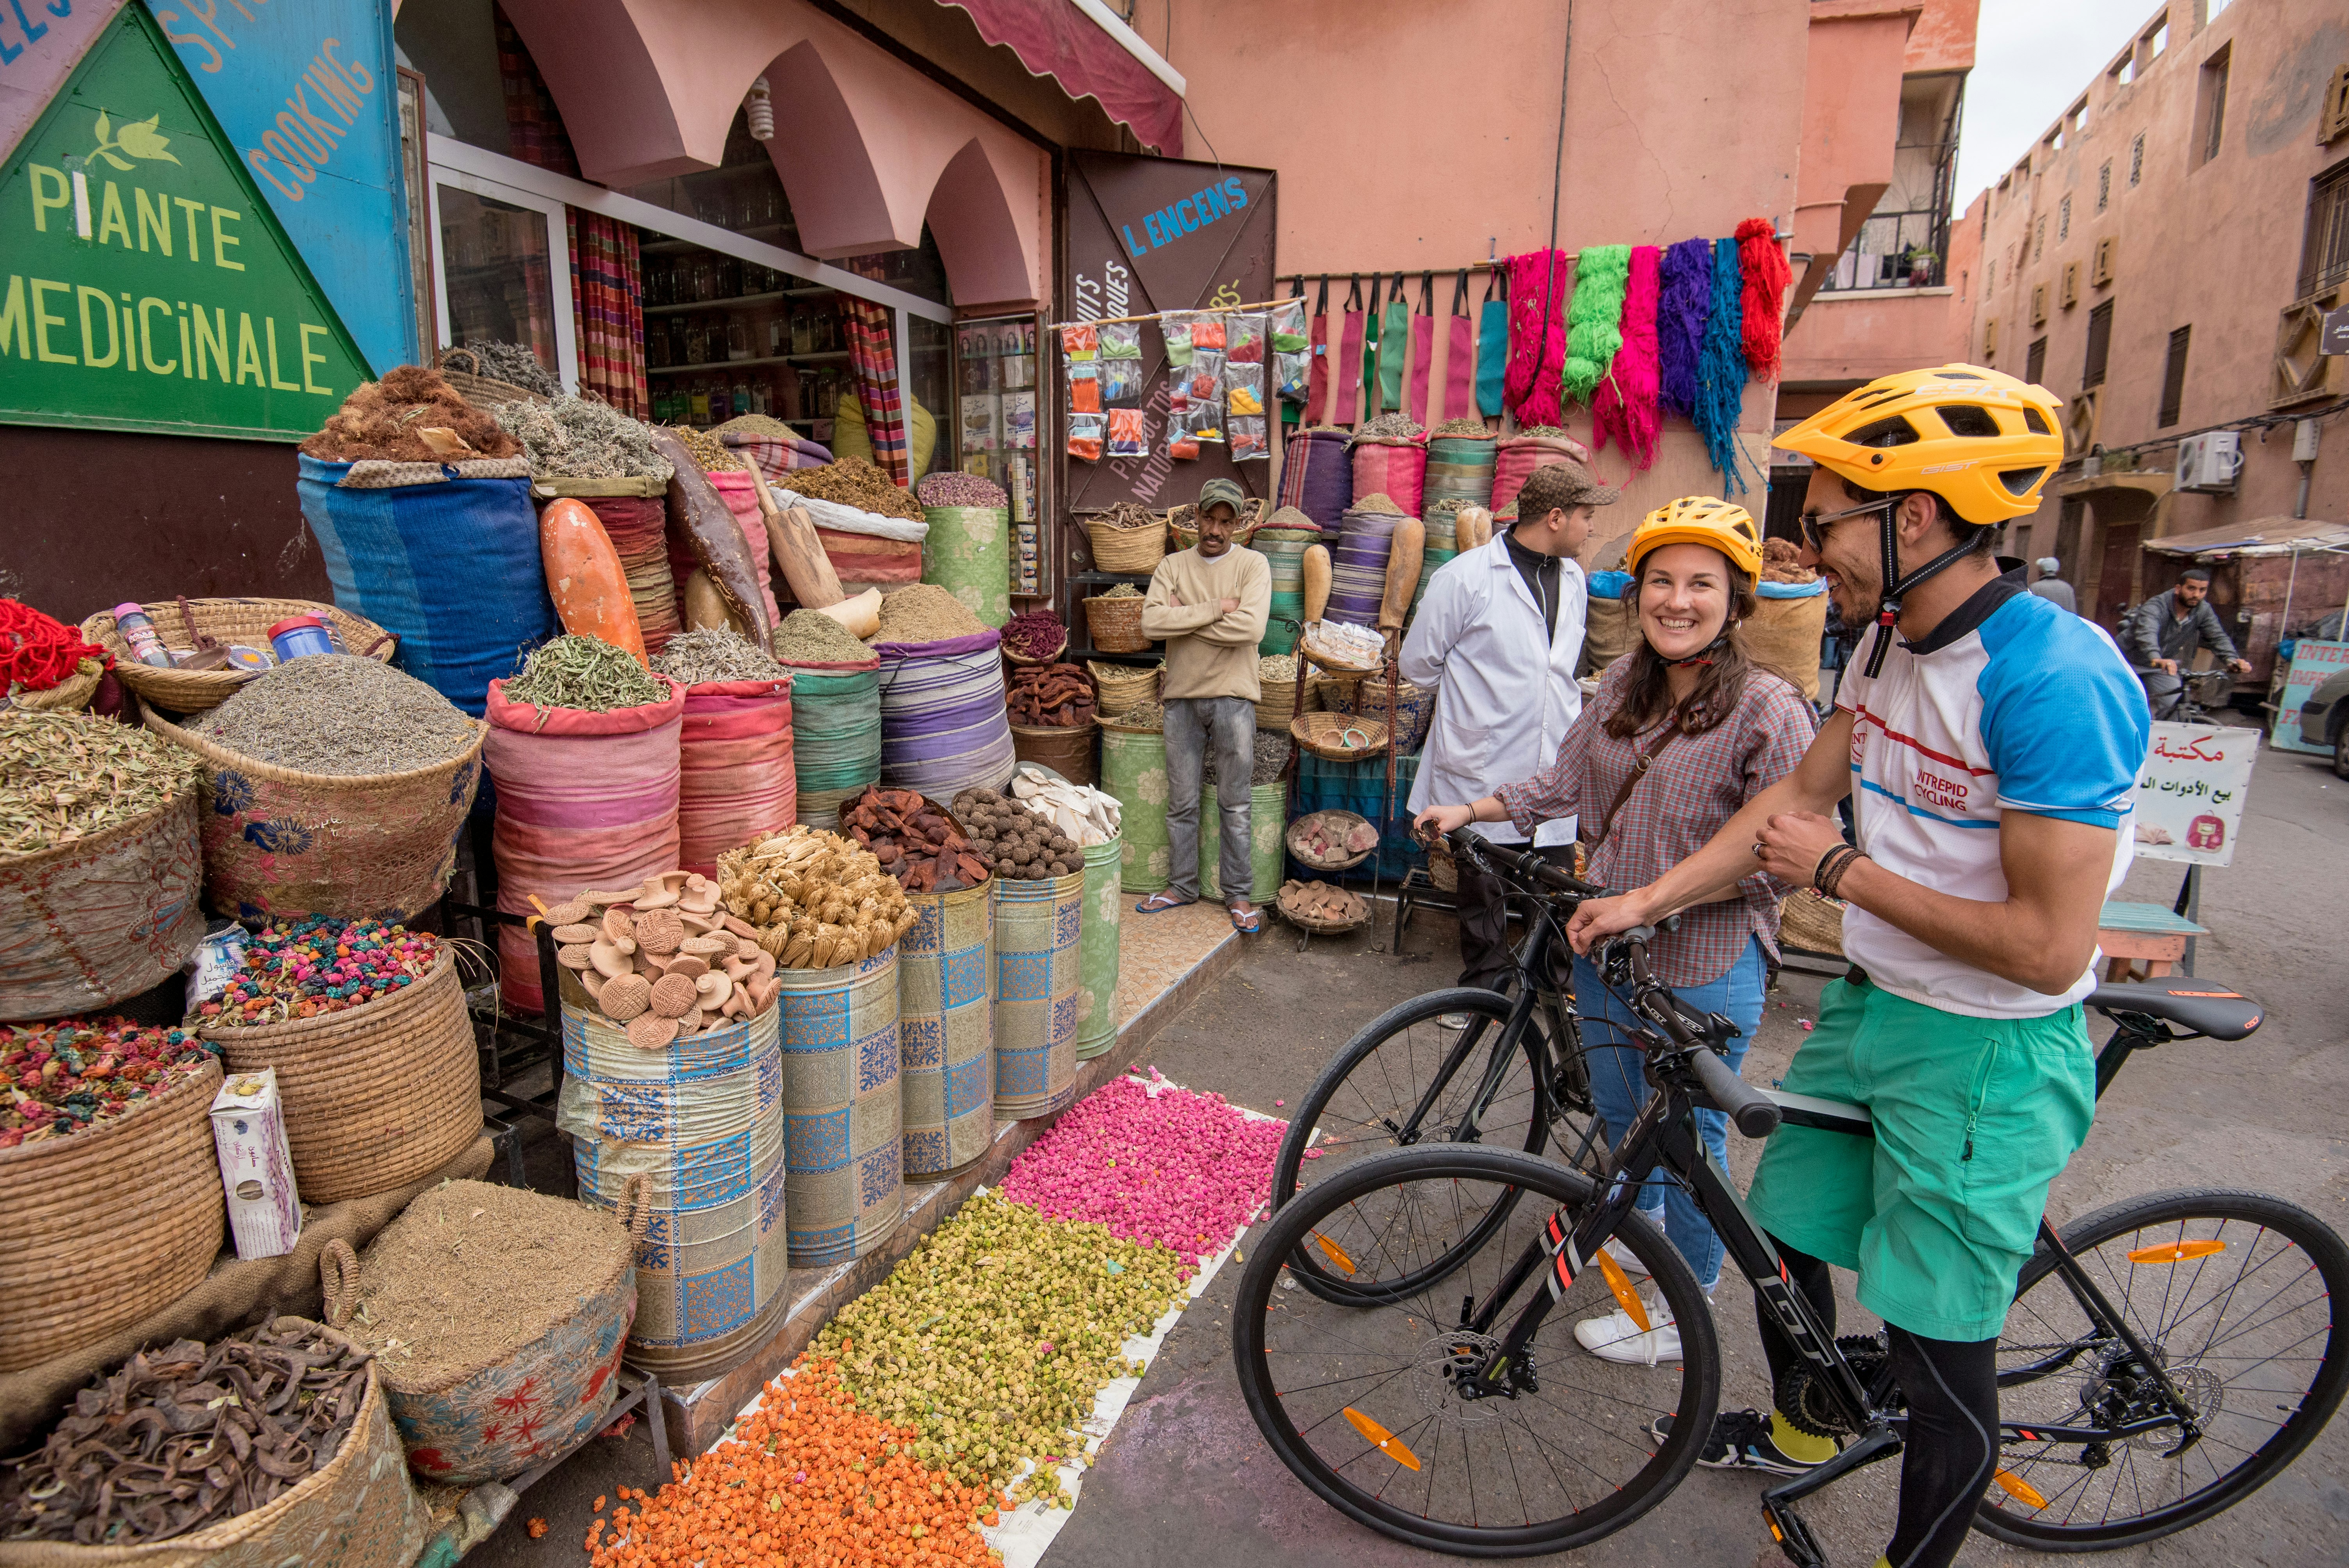 Family on bikes next to a colourful market stall.jpg